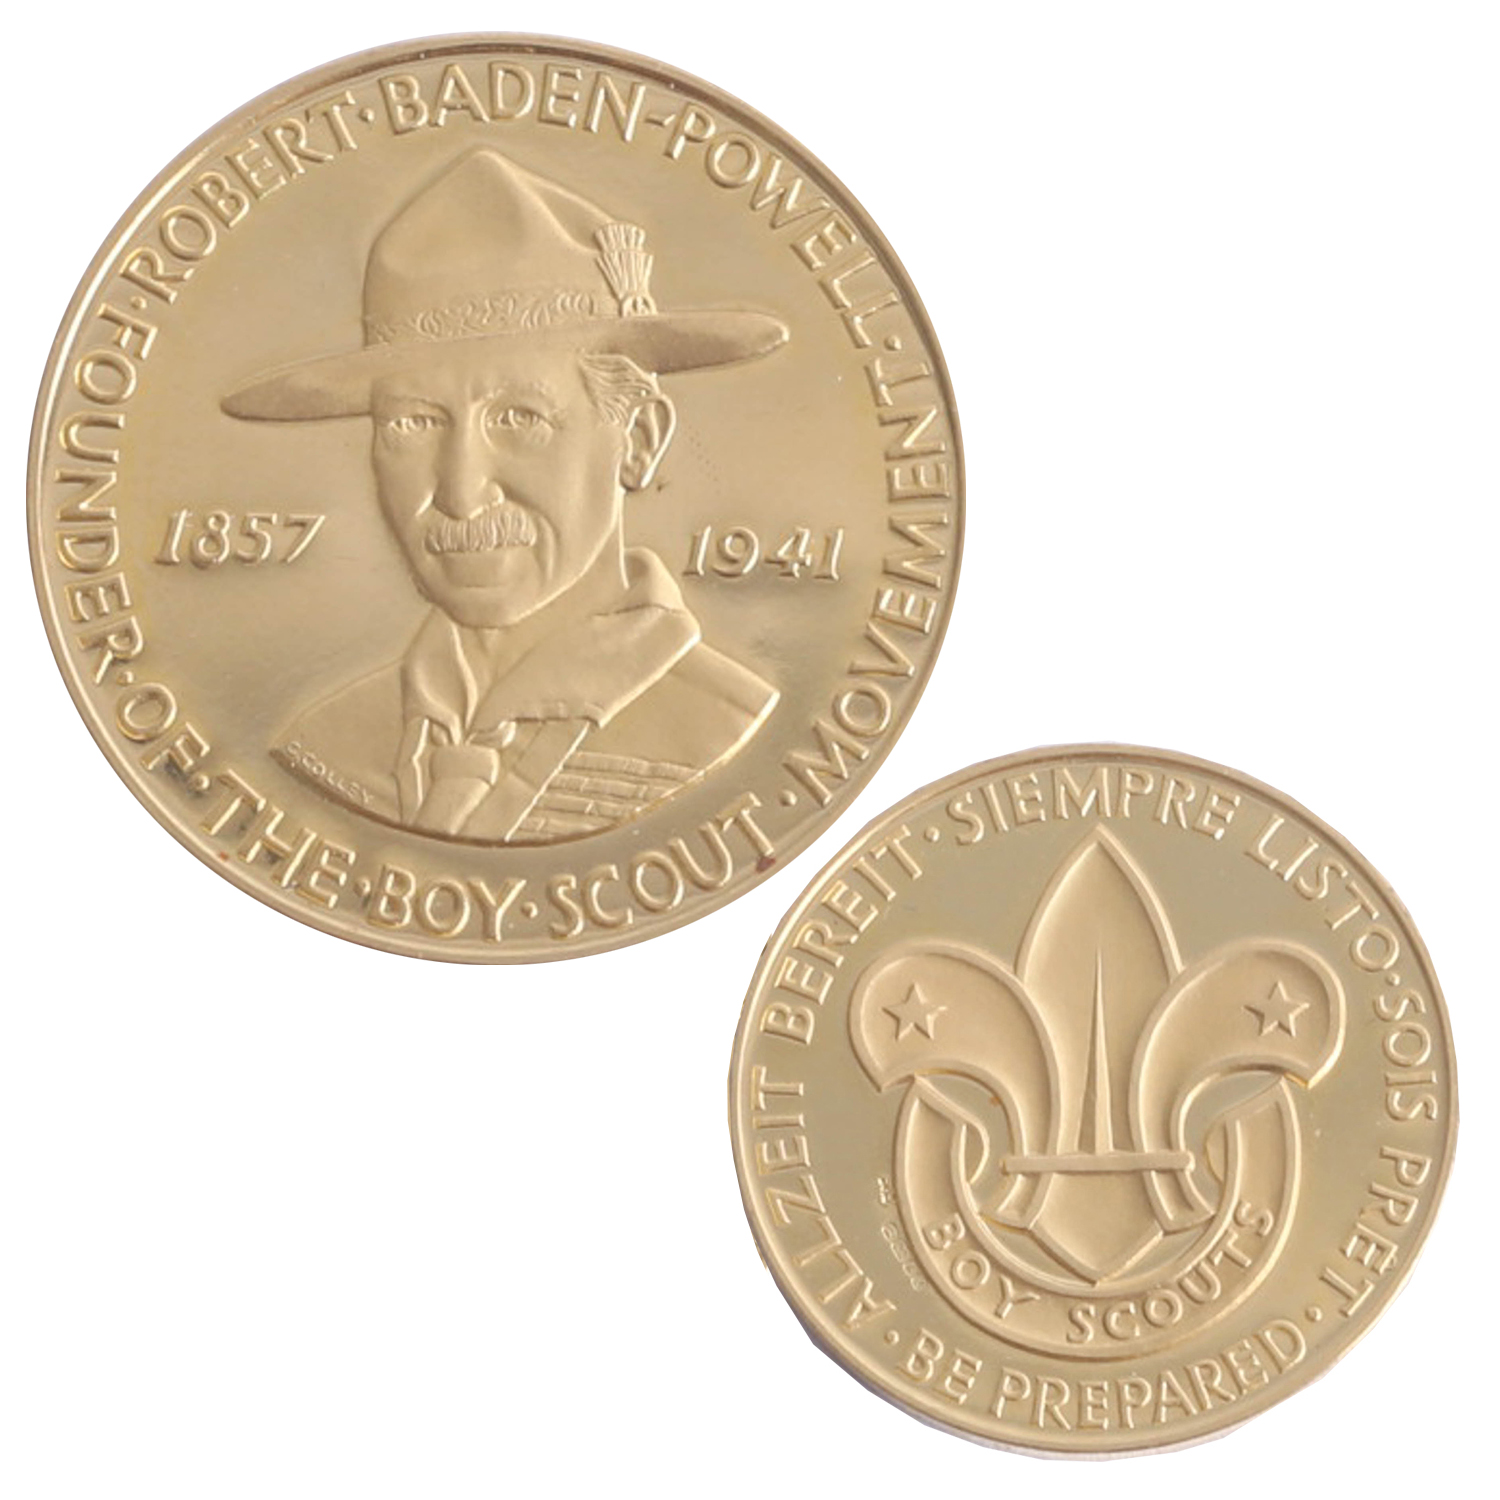 A gold medal to celebrate 25th anniversary of the death of Lord Baden Powell 17.5g with certificate,